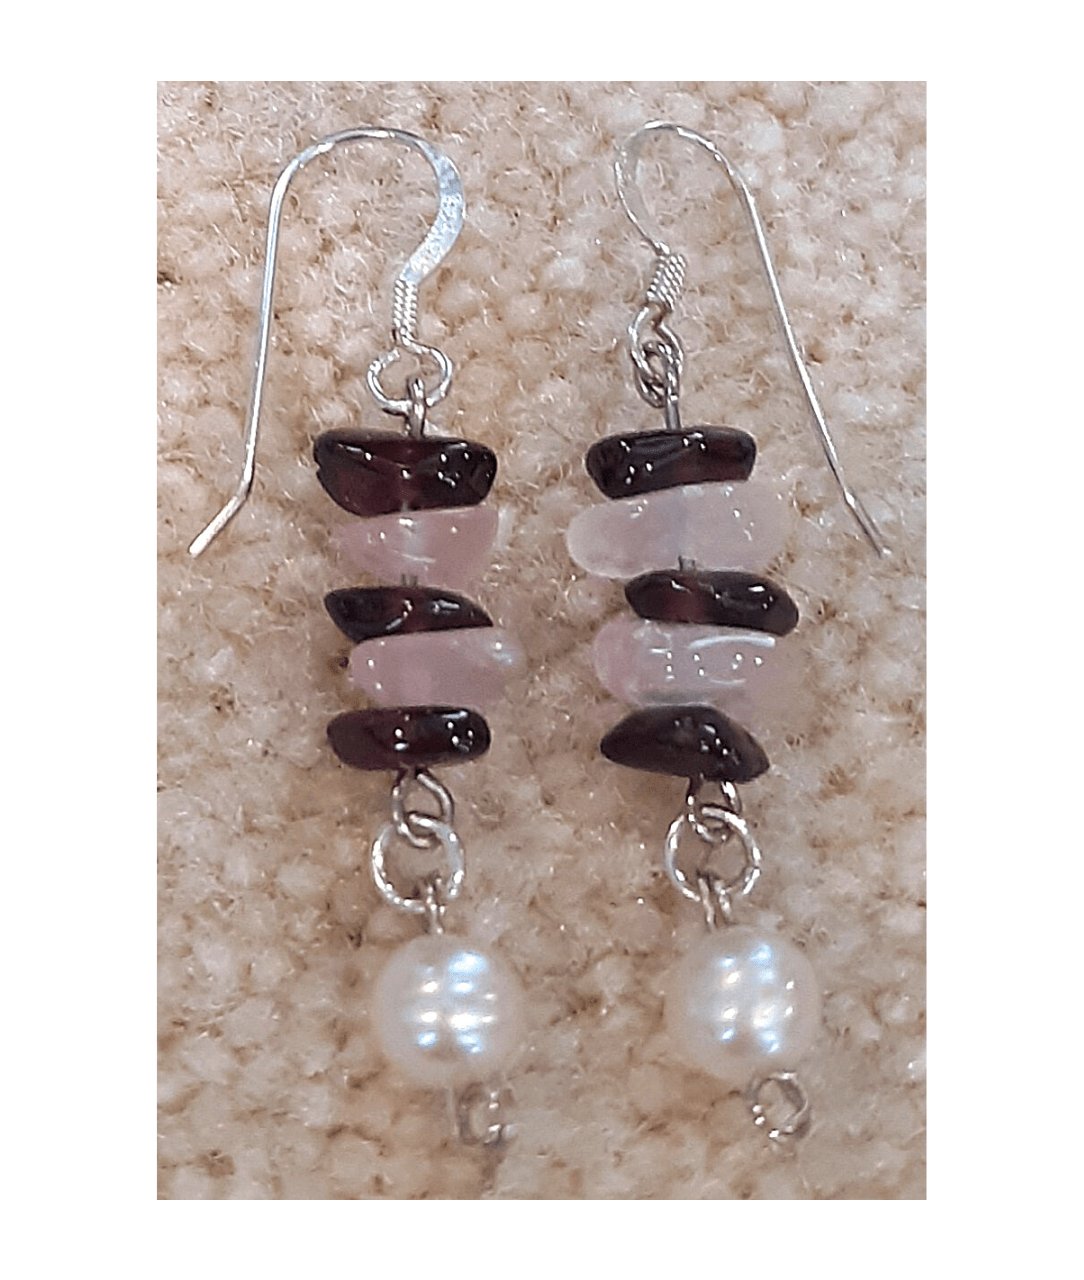 Tumbled Garnet and Rose Quartz with Genuine Pearl Sterling Silver Dangle Earrings Approx. 1 3/4"